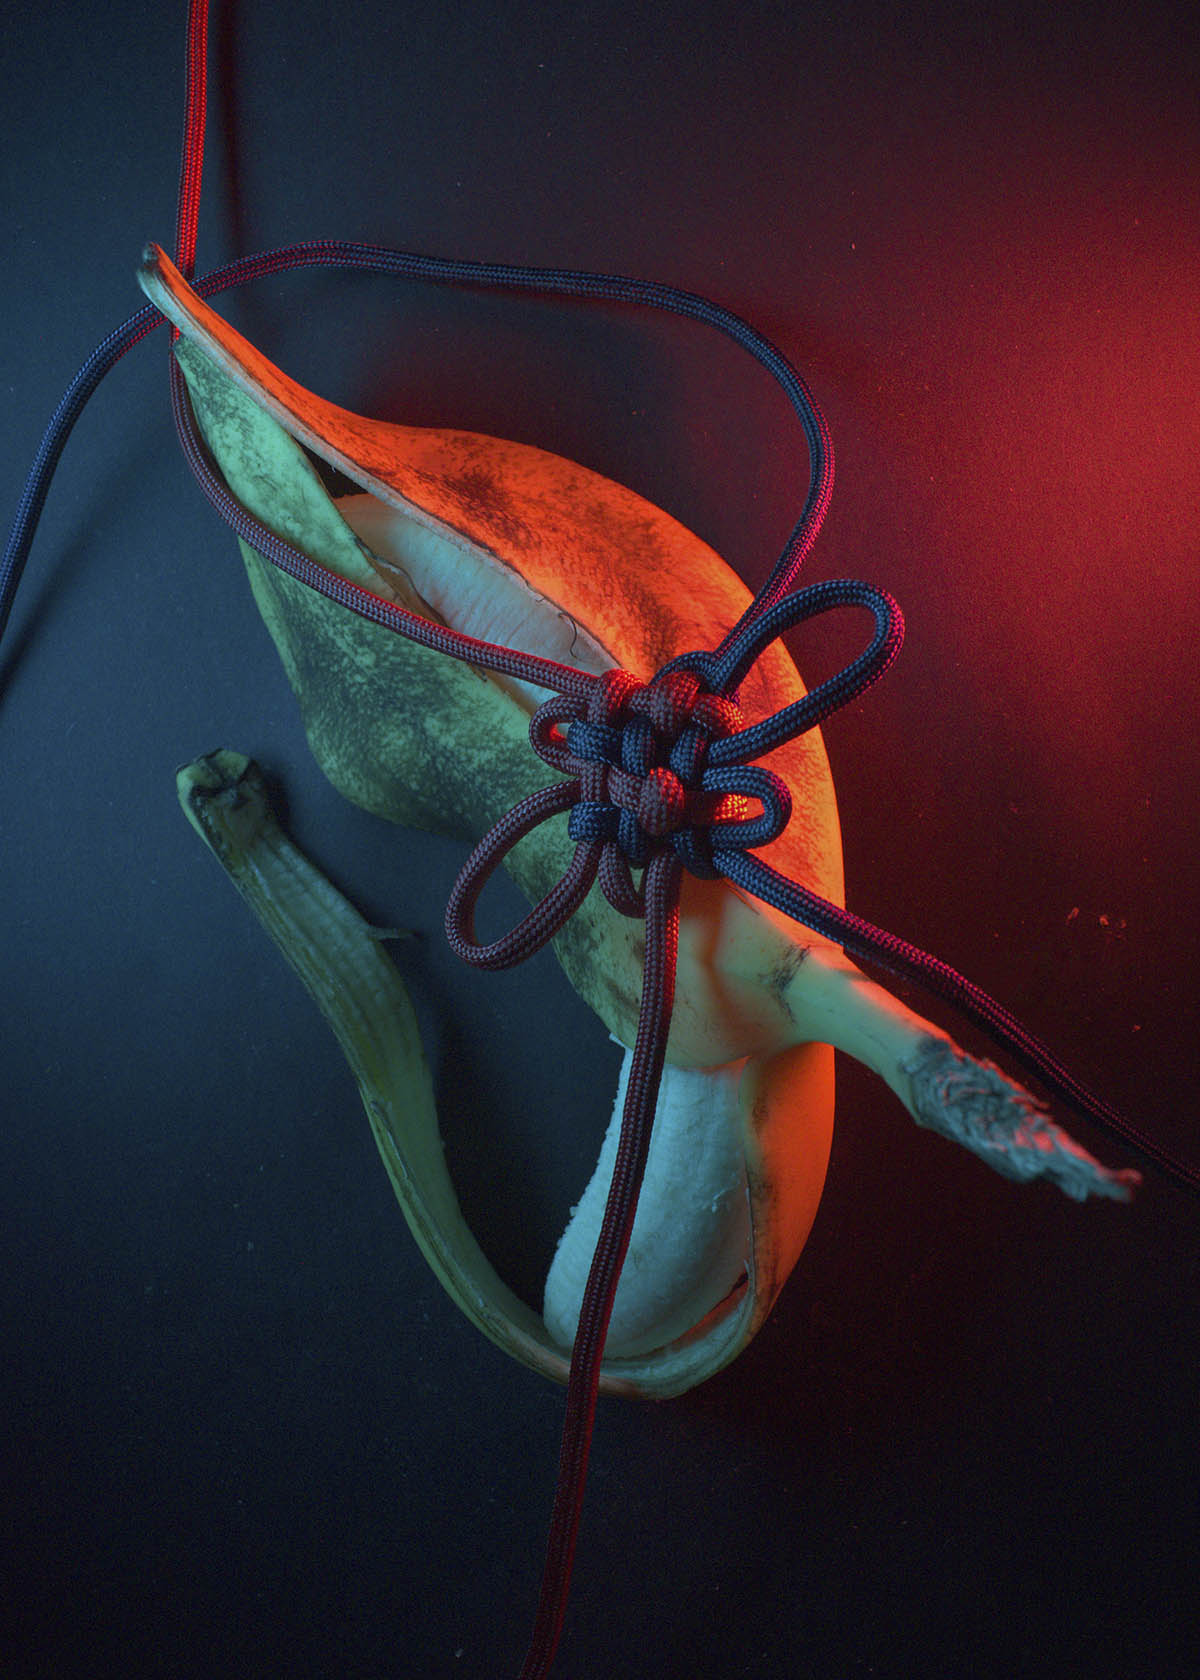 A peeled banana with the peel laying over the banana and encasing it on both sides, with a red and blue rope knotted together and placed on top of the banana. This is over a black background and is lit with red and blue light.